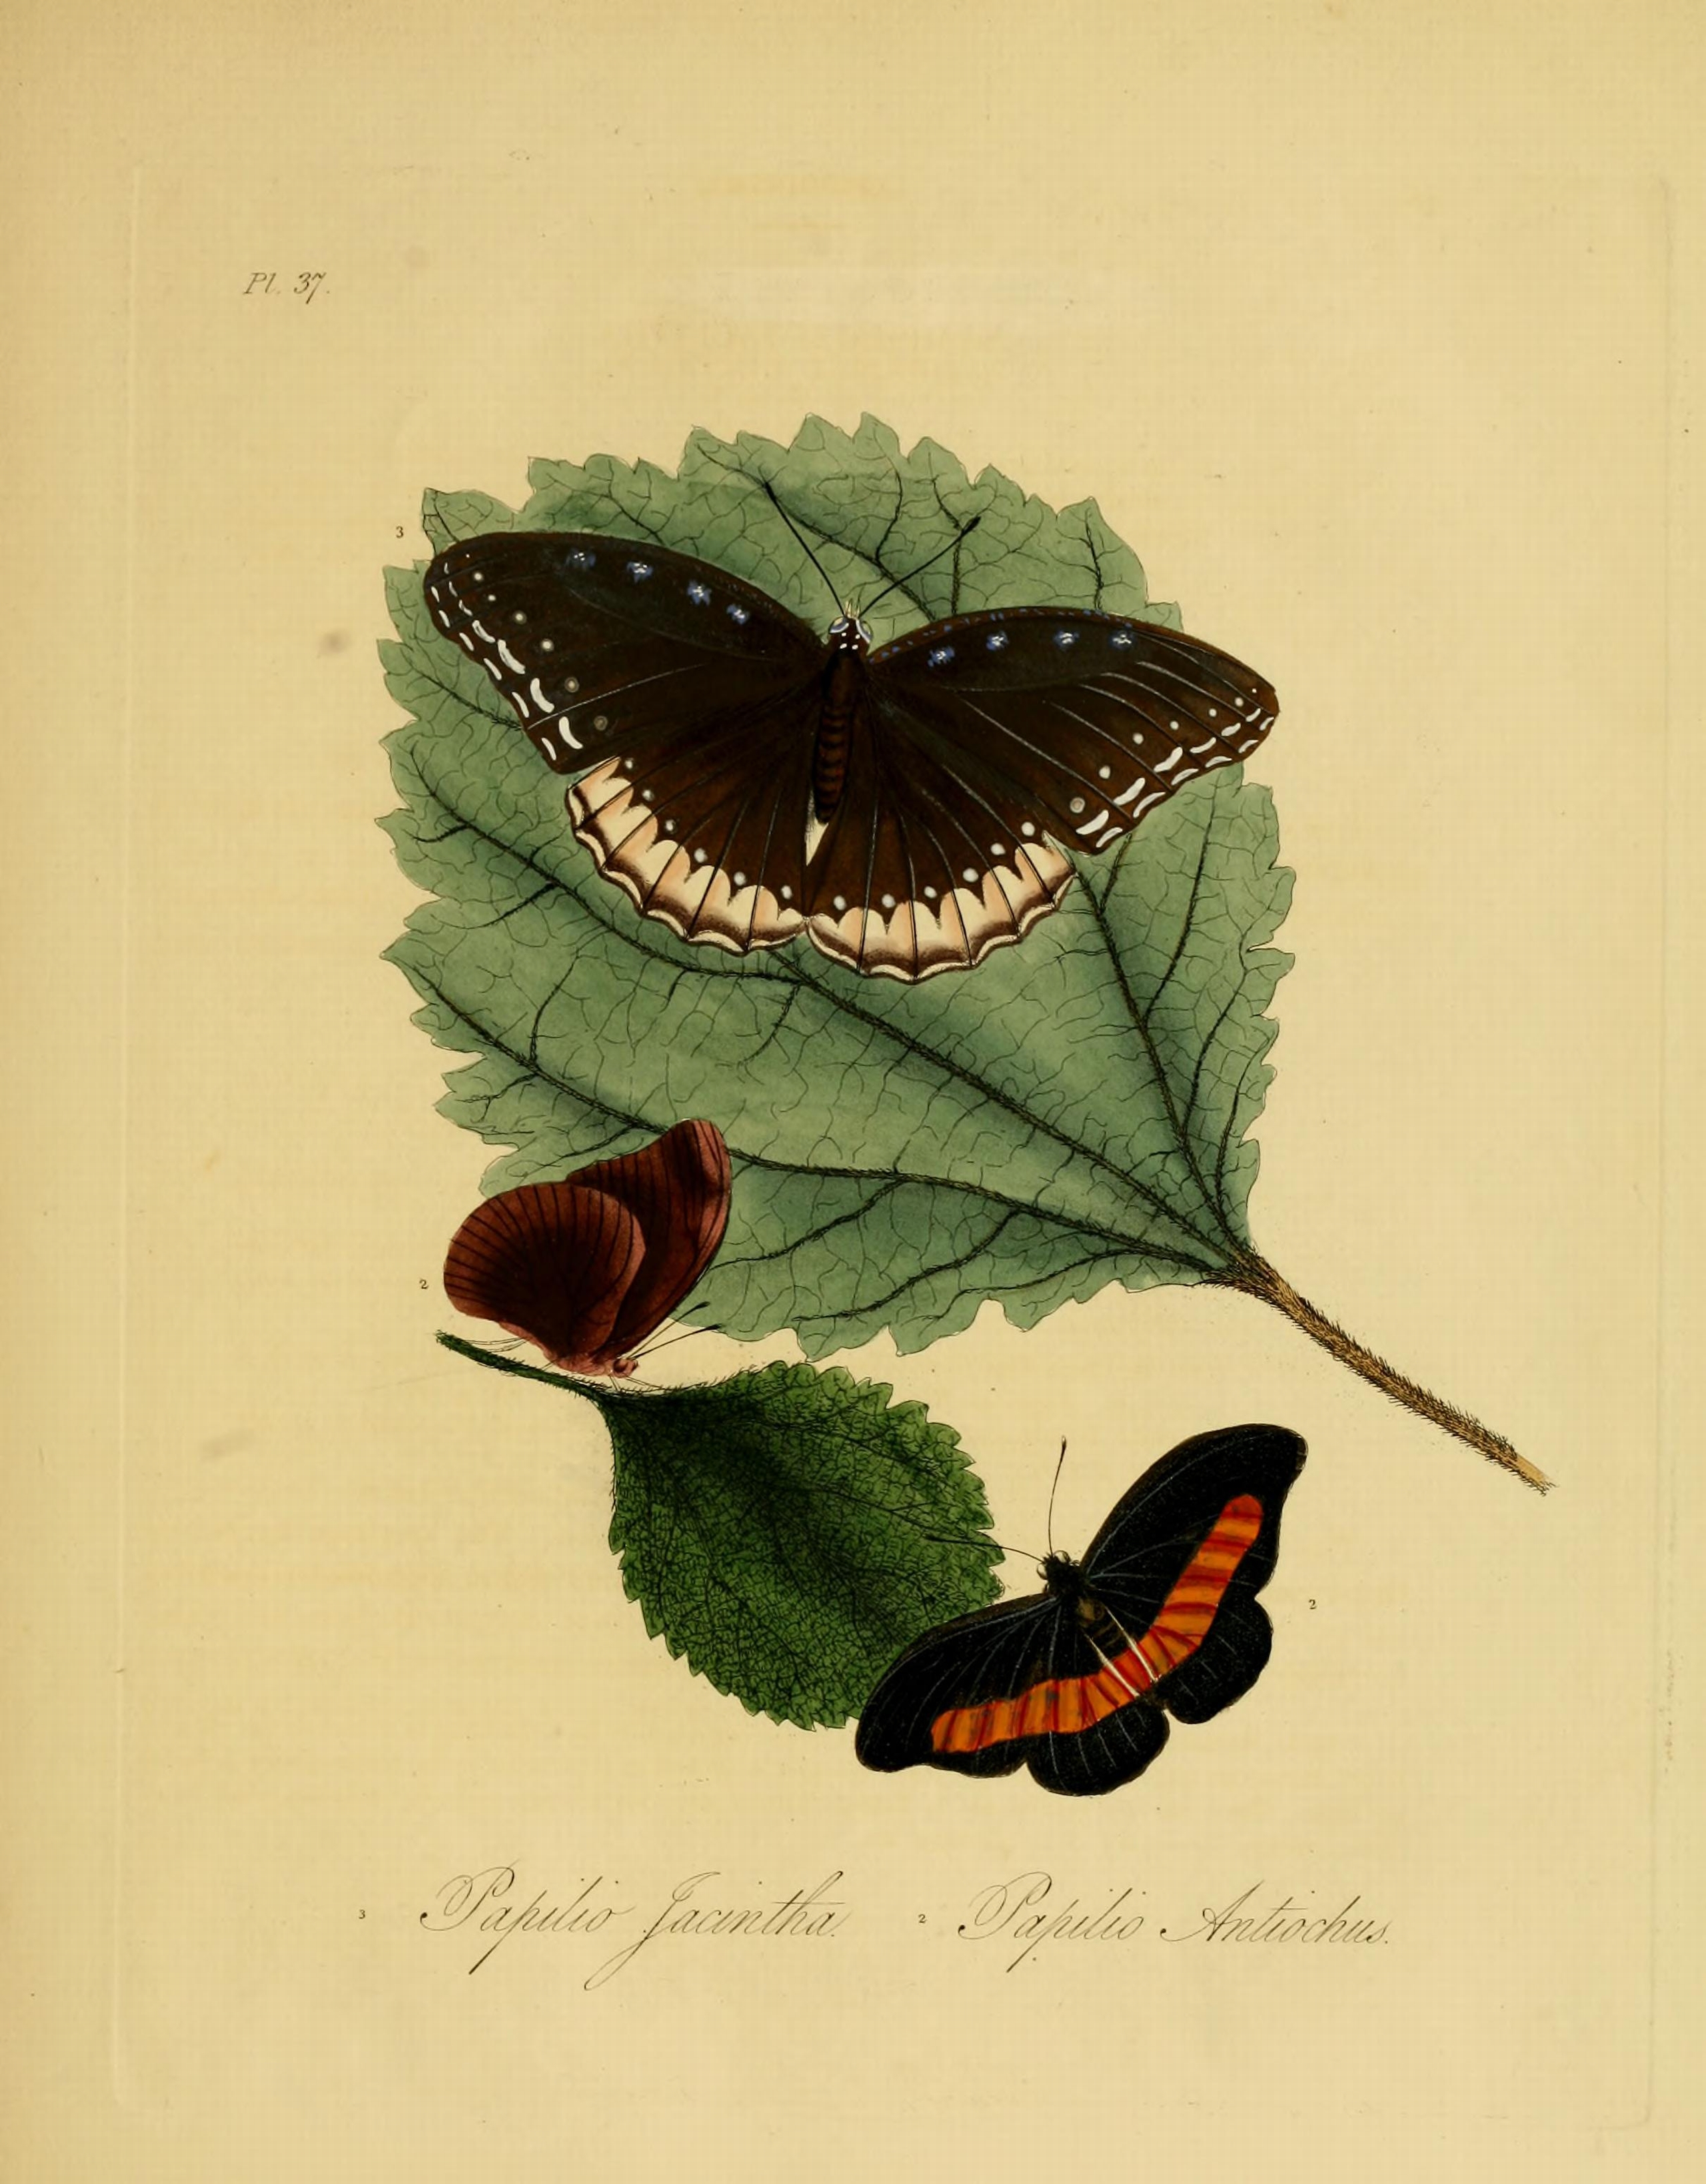 Donovan - Insects of China, 1838 - pl 37